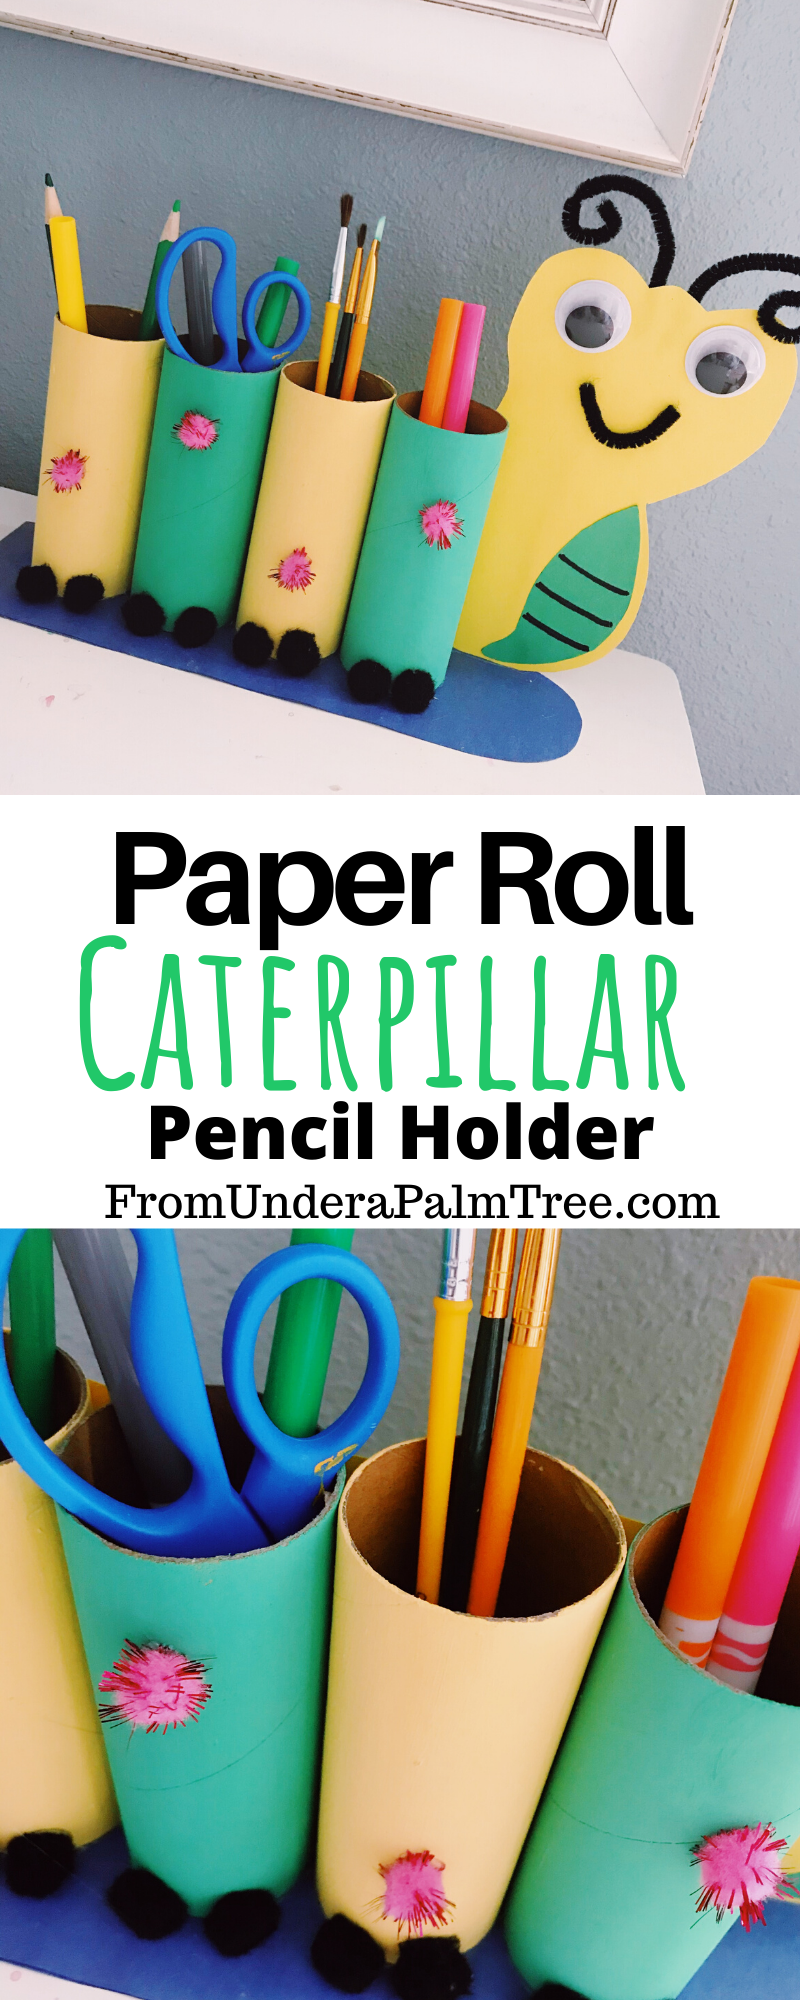 paper roll craft | crafts for kids | crafts for preschoolers | preschool crafts | crafts made from recycled material | toilet paper roll crafts | paper towel roll crafts | paper roll caterpillar | DIY pencil holder | DIY crafts for kids | Spring crafts for kids | spring craft | 